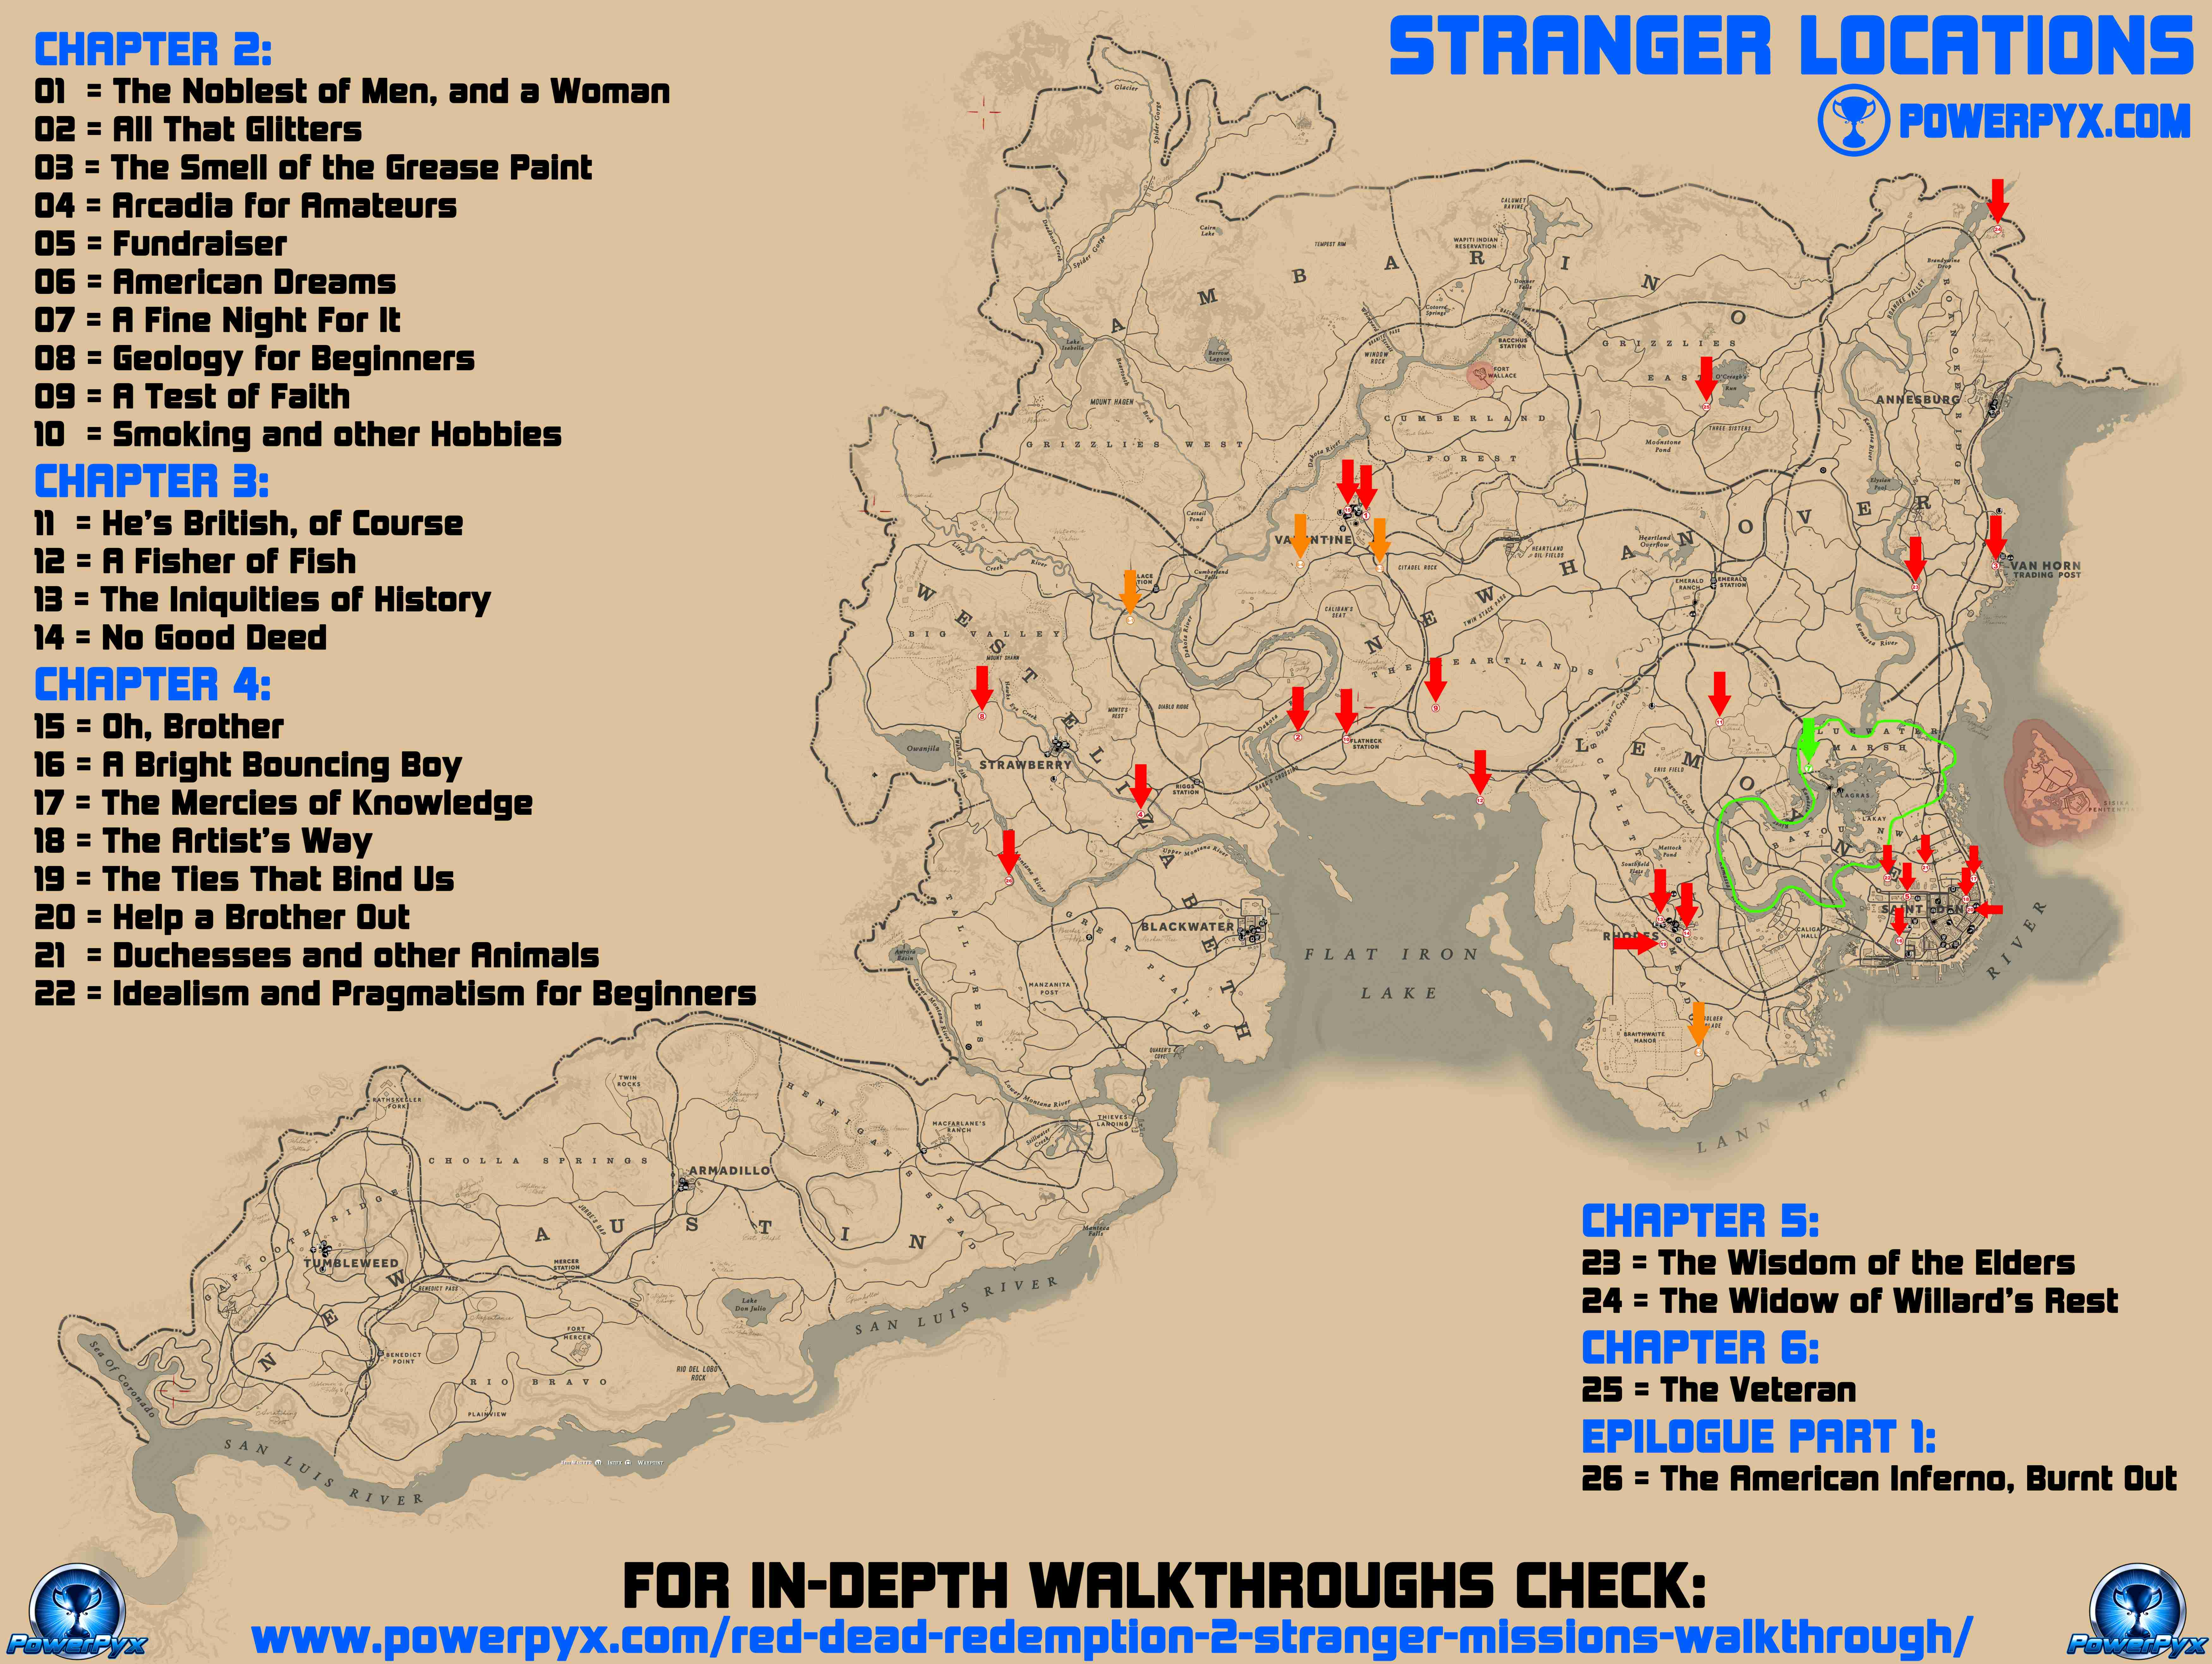 Red Dead Redemption 2 Stranger Locations Map 